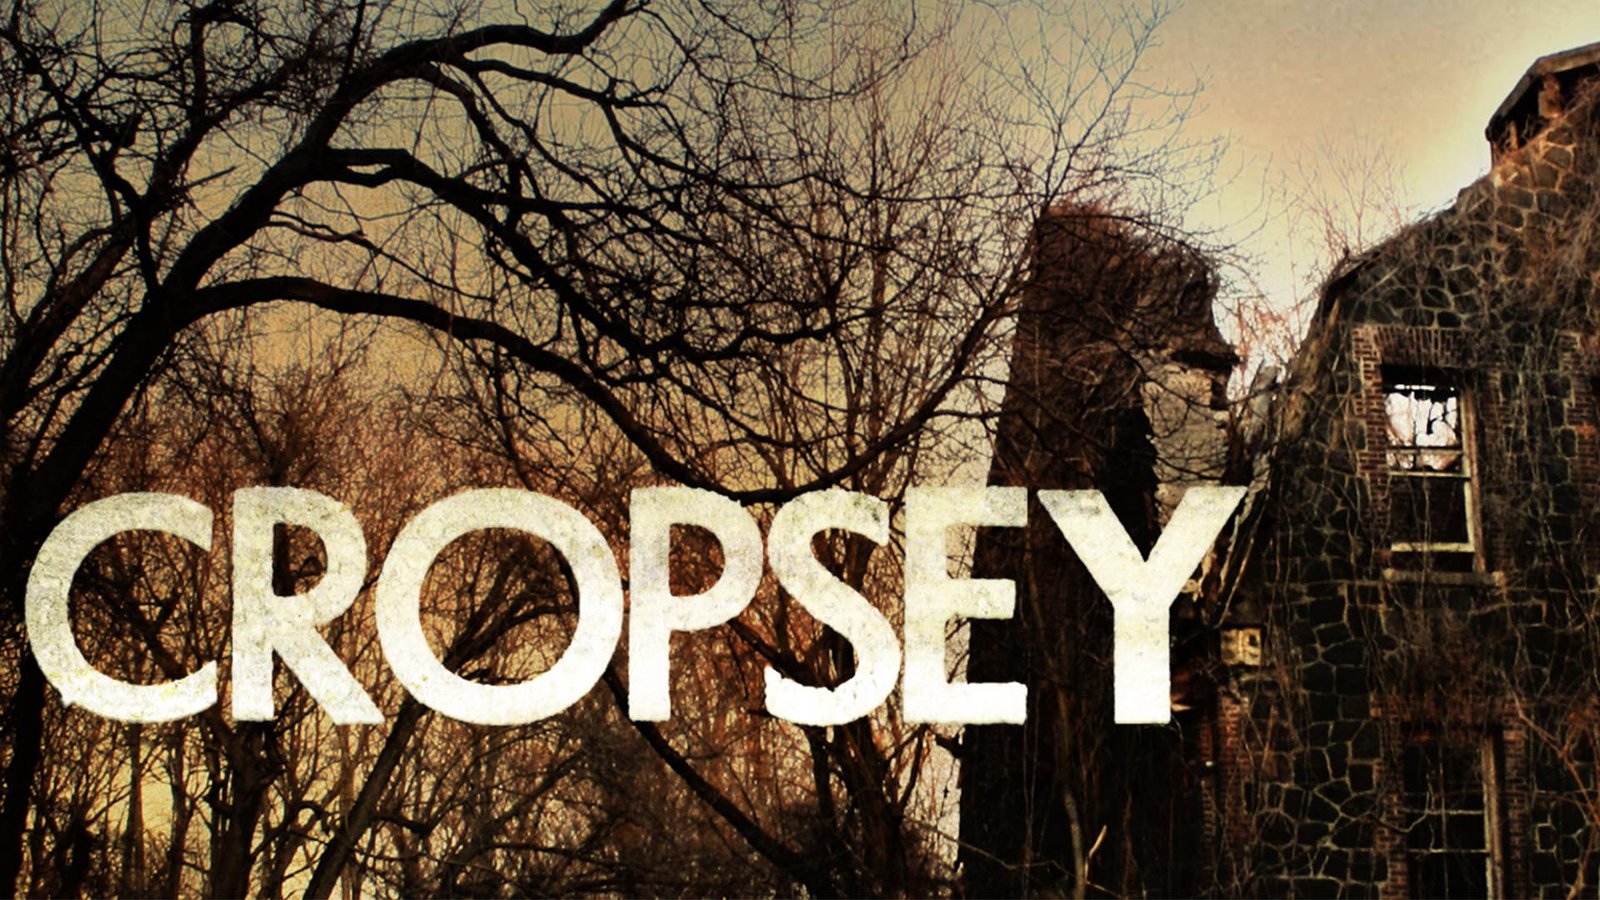 Cropsey - The Truth Behind a Terrifying Urban Legend